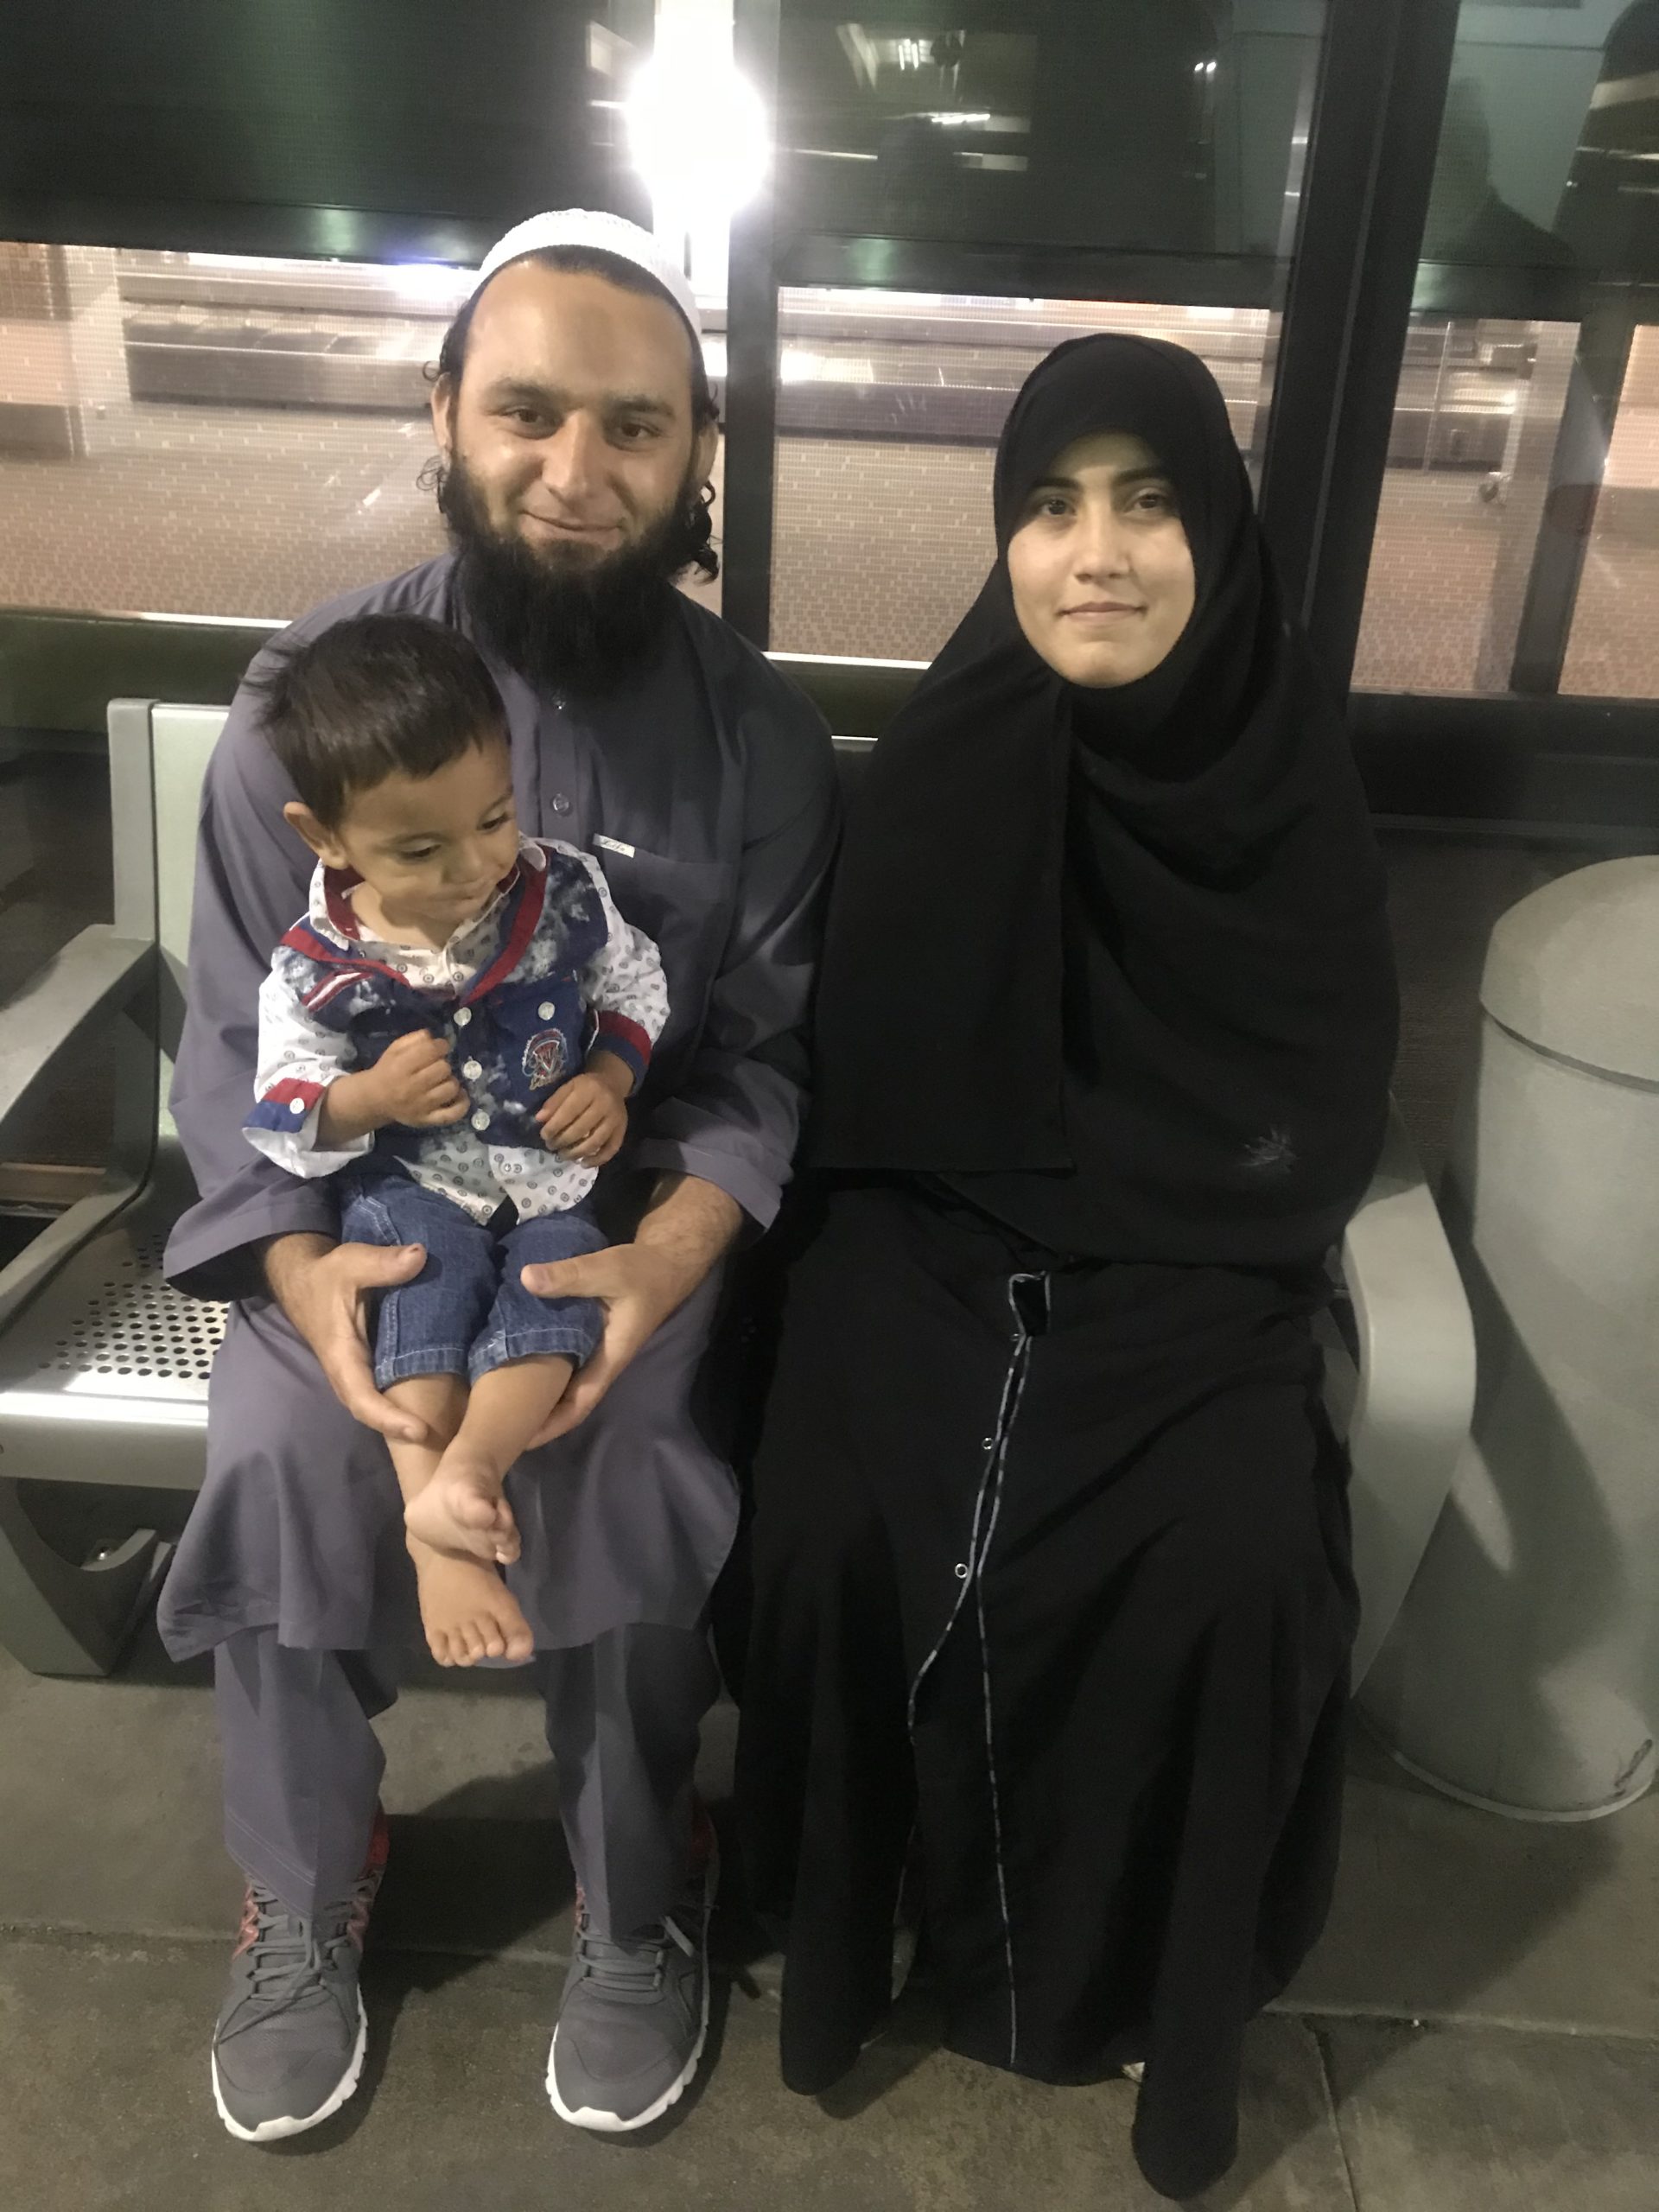 Ibne and his wife Salma together with their son living in United States as a US citizen